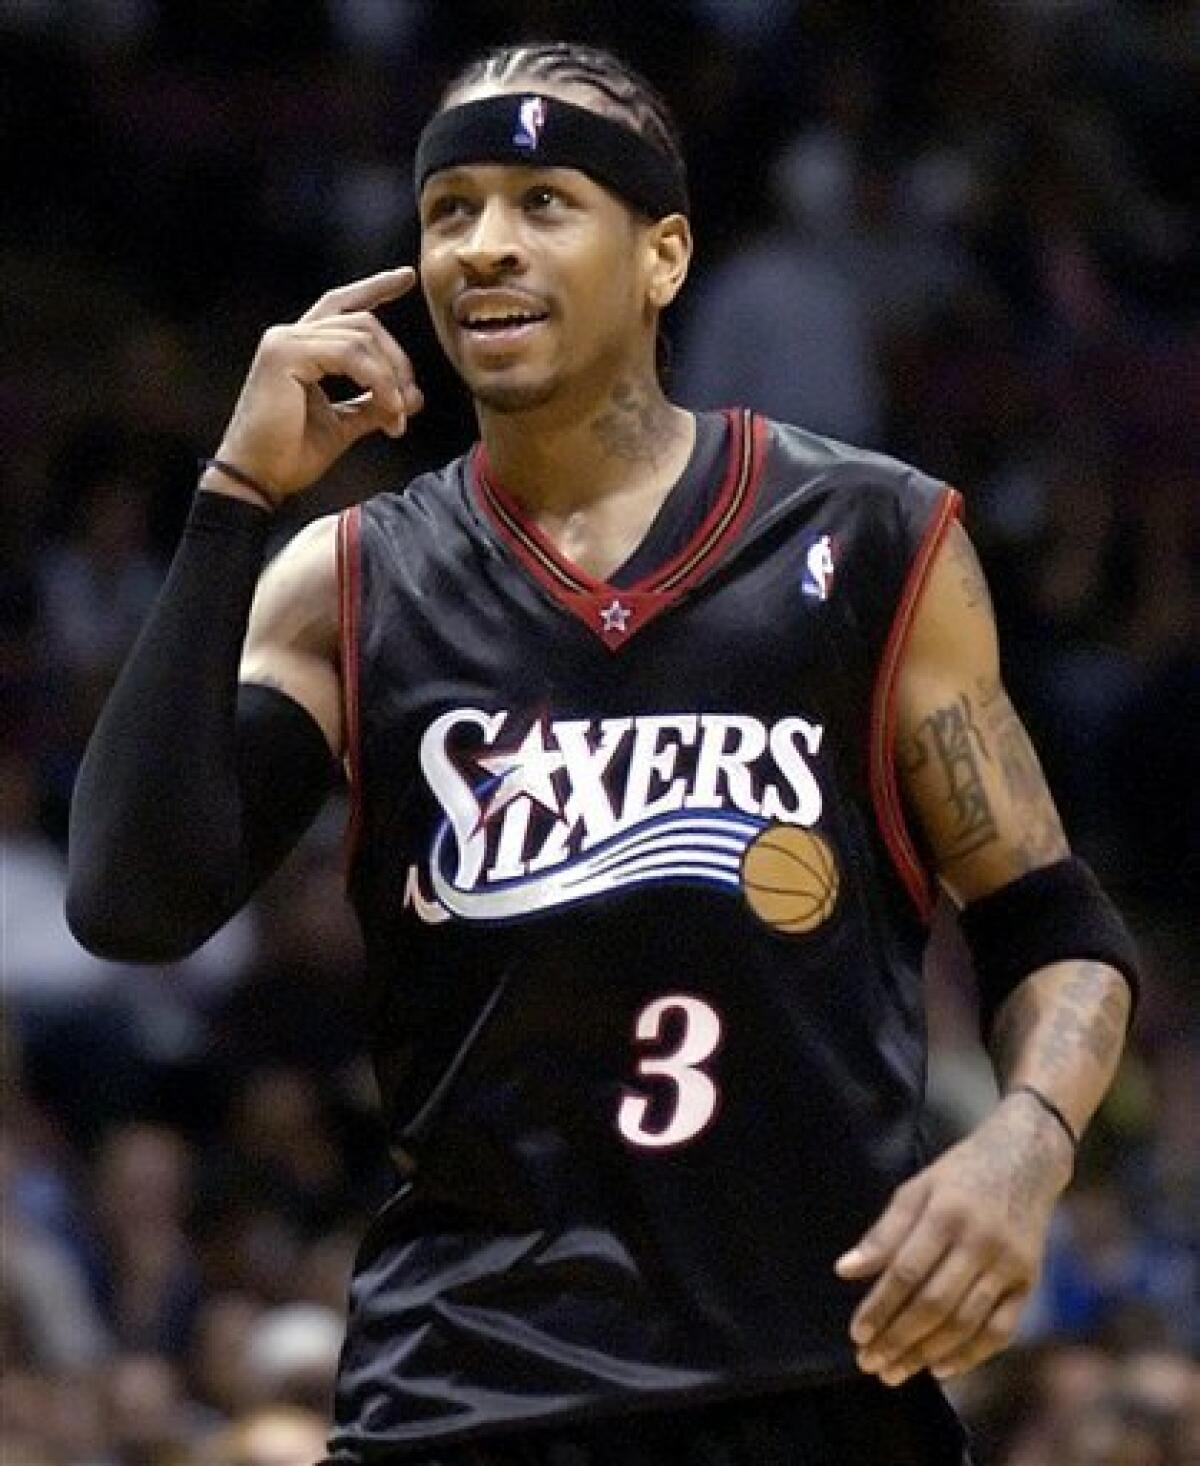 FILE - In this April 12, 2006, file photo Philadelphia 76ers' Allen Iverson reacts during the fourth quarter of an NBA basketball against the New Jersey Nets, in East Rutherford, N.J. Philadelphia 76ers president Ed Stefanski announced Wednesday, Dec. 2, 2009, on the team's Web site that Iverson will rejoining the 76ers. (AP Photo/Bill Kostroun, File)